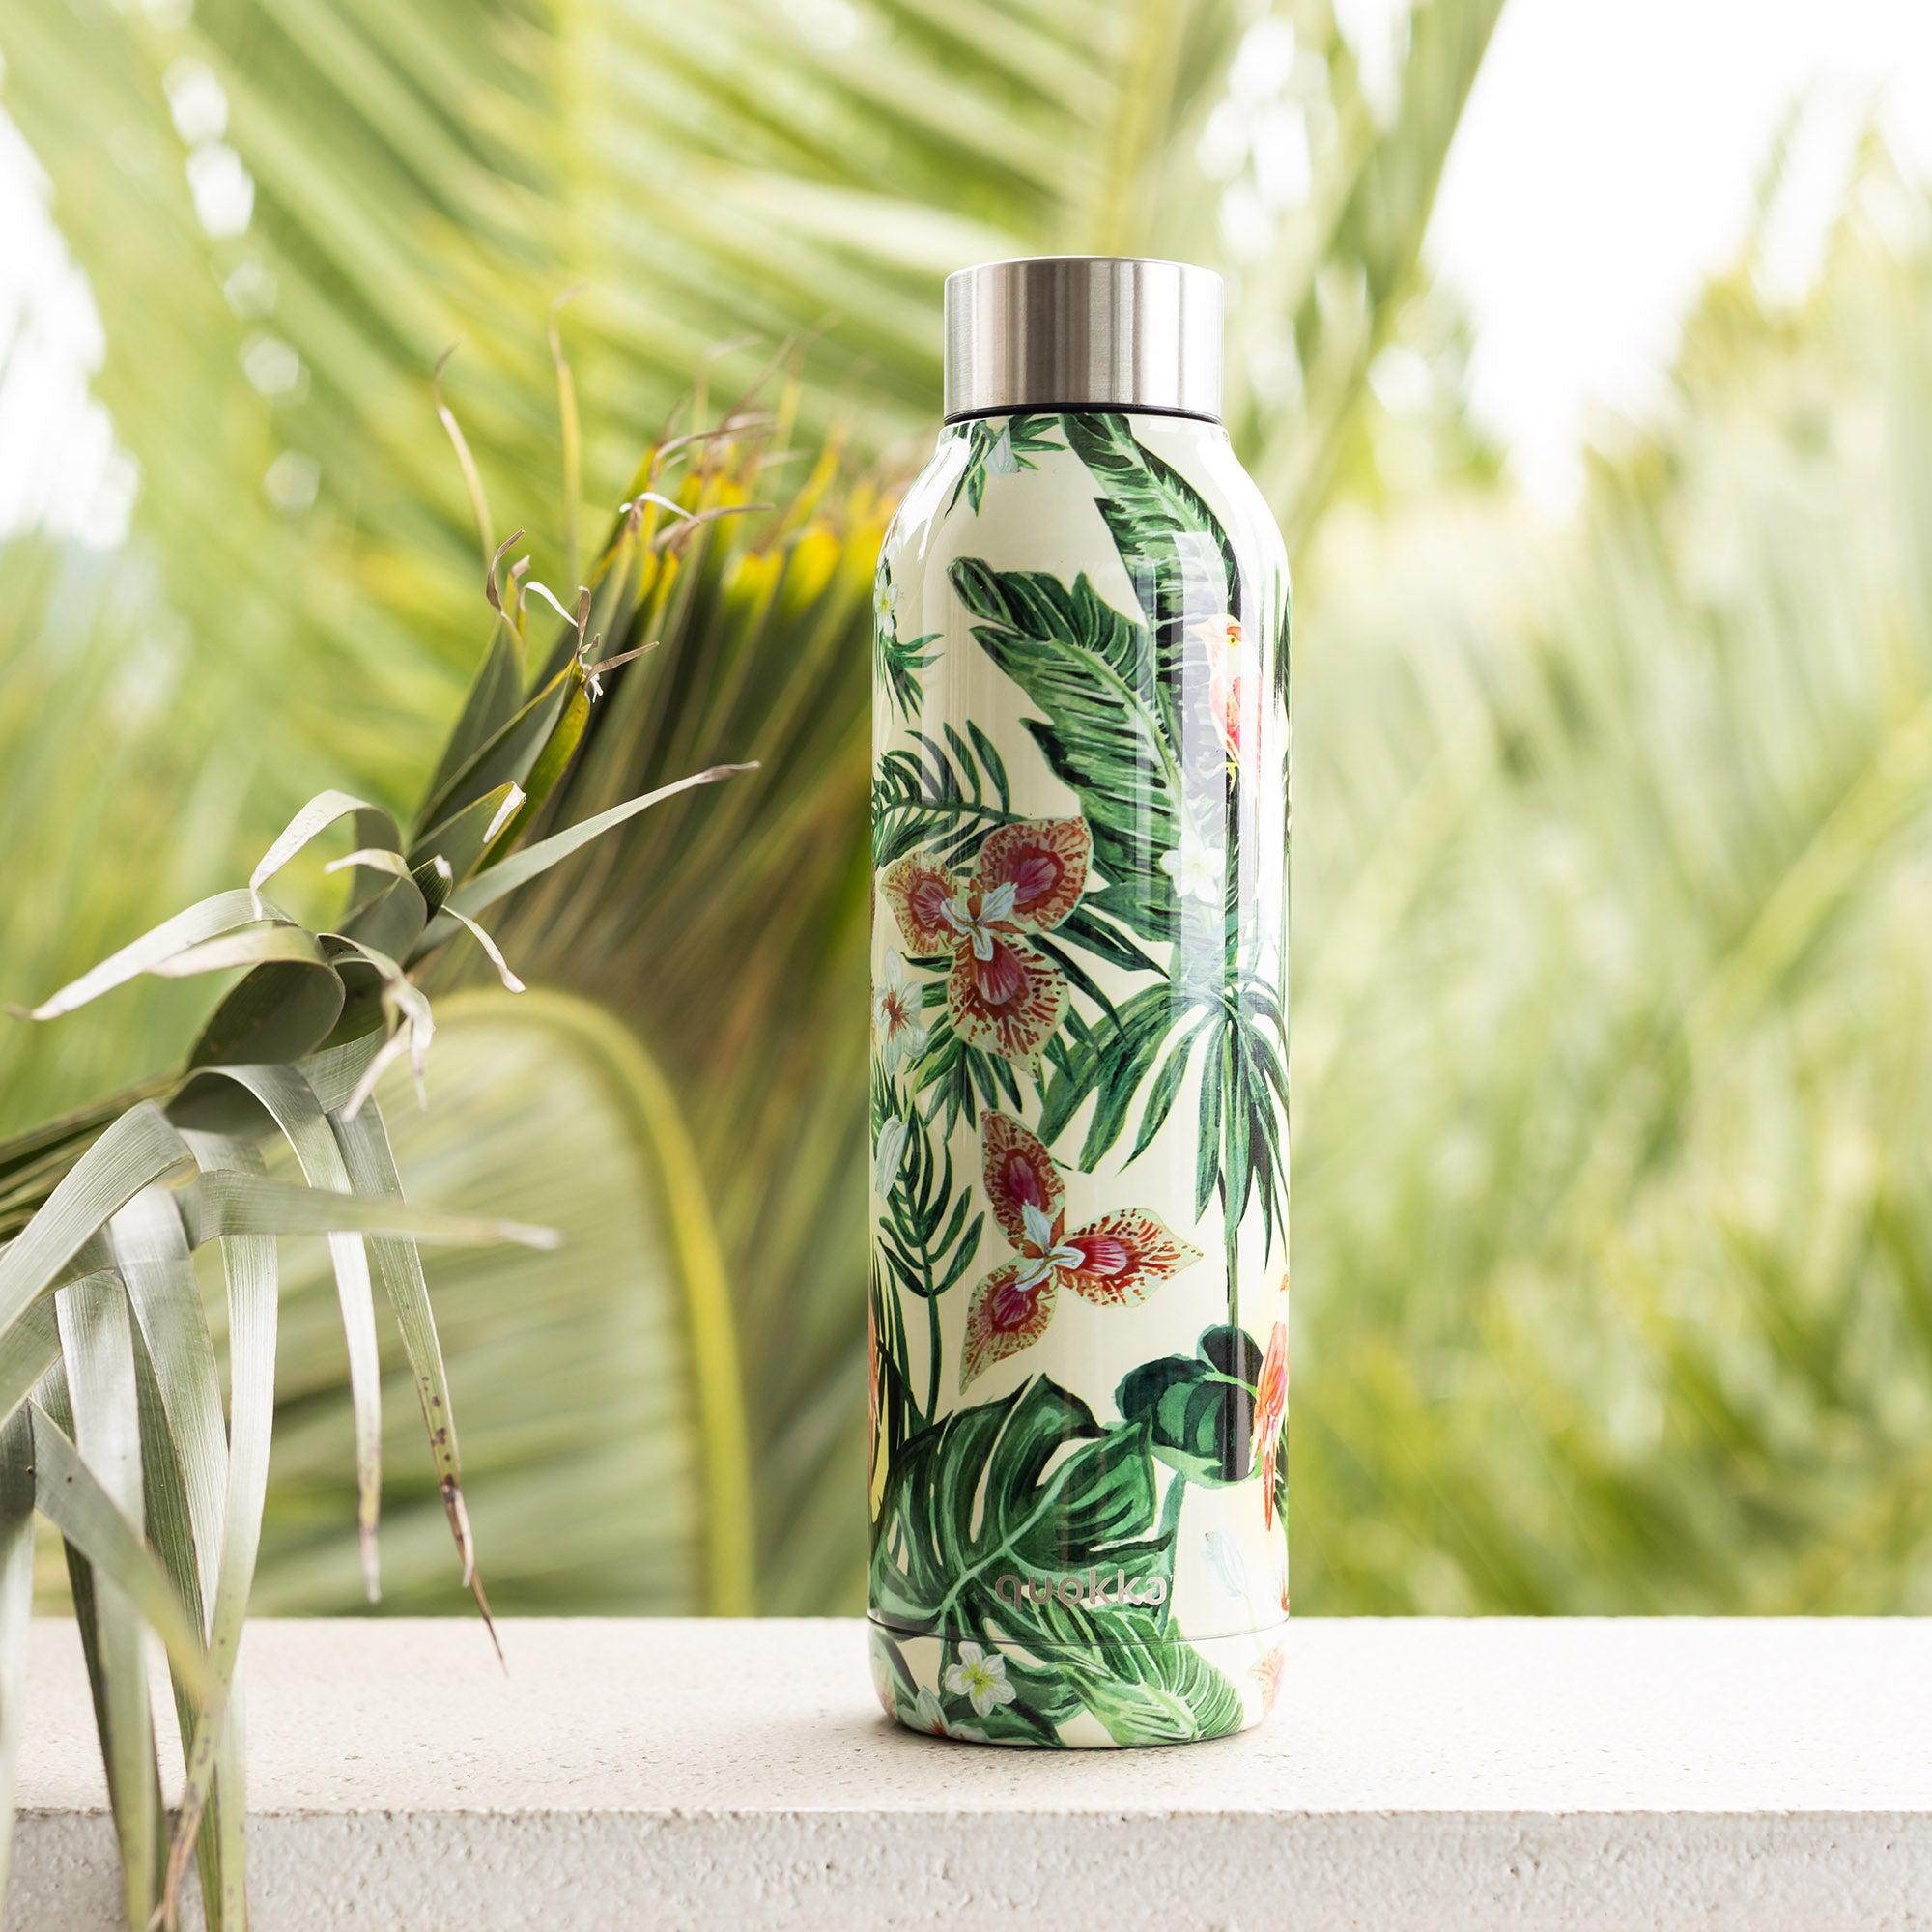 QUOKKA THERMAL SS BOTTLE SOLID JUNGLE FLORA 630 ML